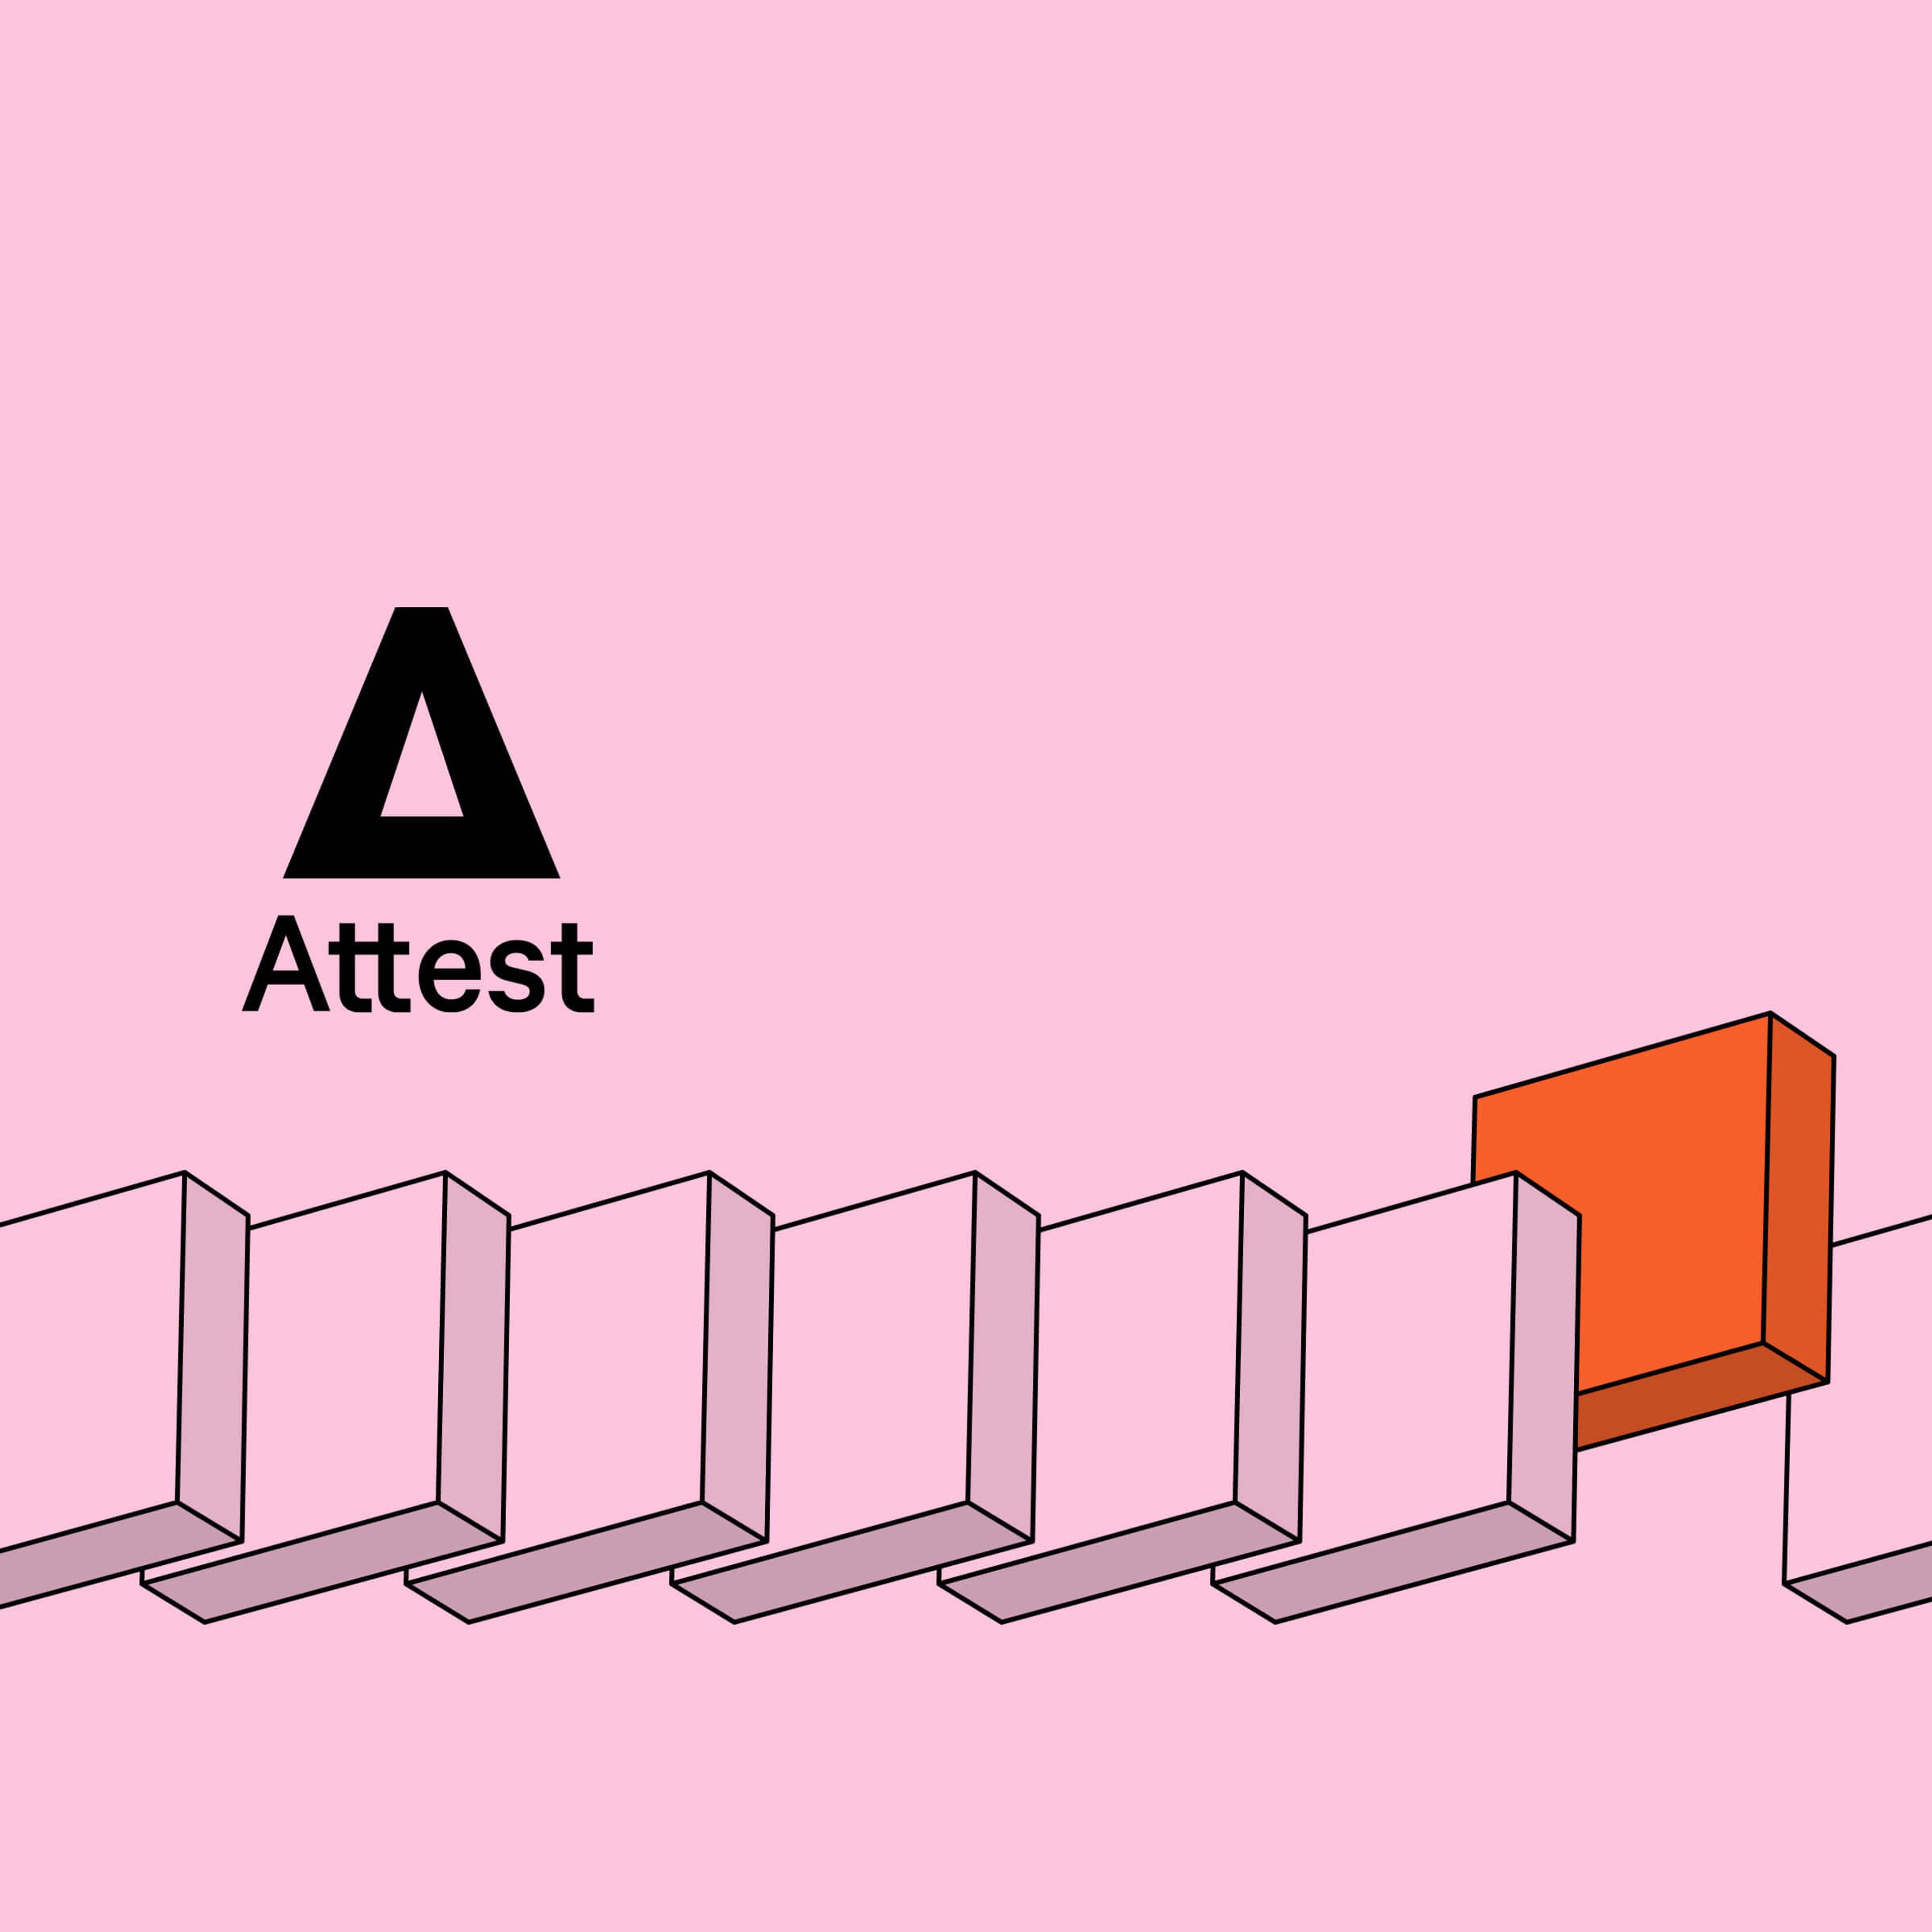 Graphic image on a pink background featuring a continuous line drawing of a series of connected, three-dimensional rectangles that resemble a fence. One rectangle is colored orange and stands out from the rest. Above the image is the black capital letter 'A' followed by the word 'Attest' in black lowercase letters, creating a logo. The overall design suggests uniqueness or standing out from the crowd.